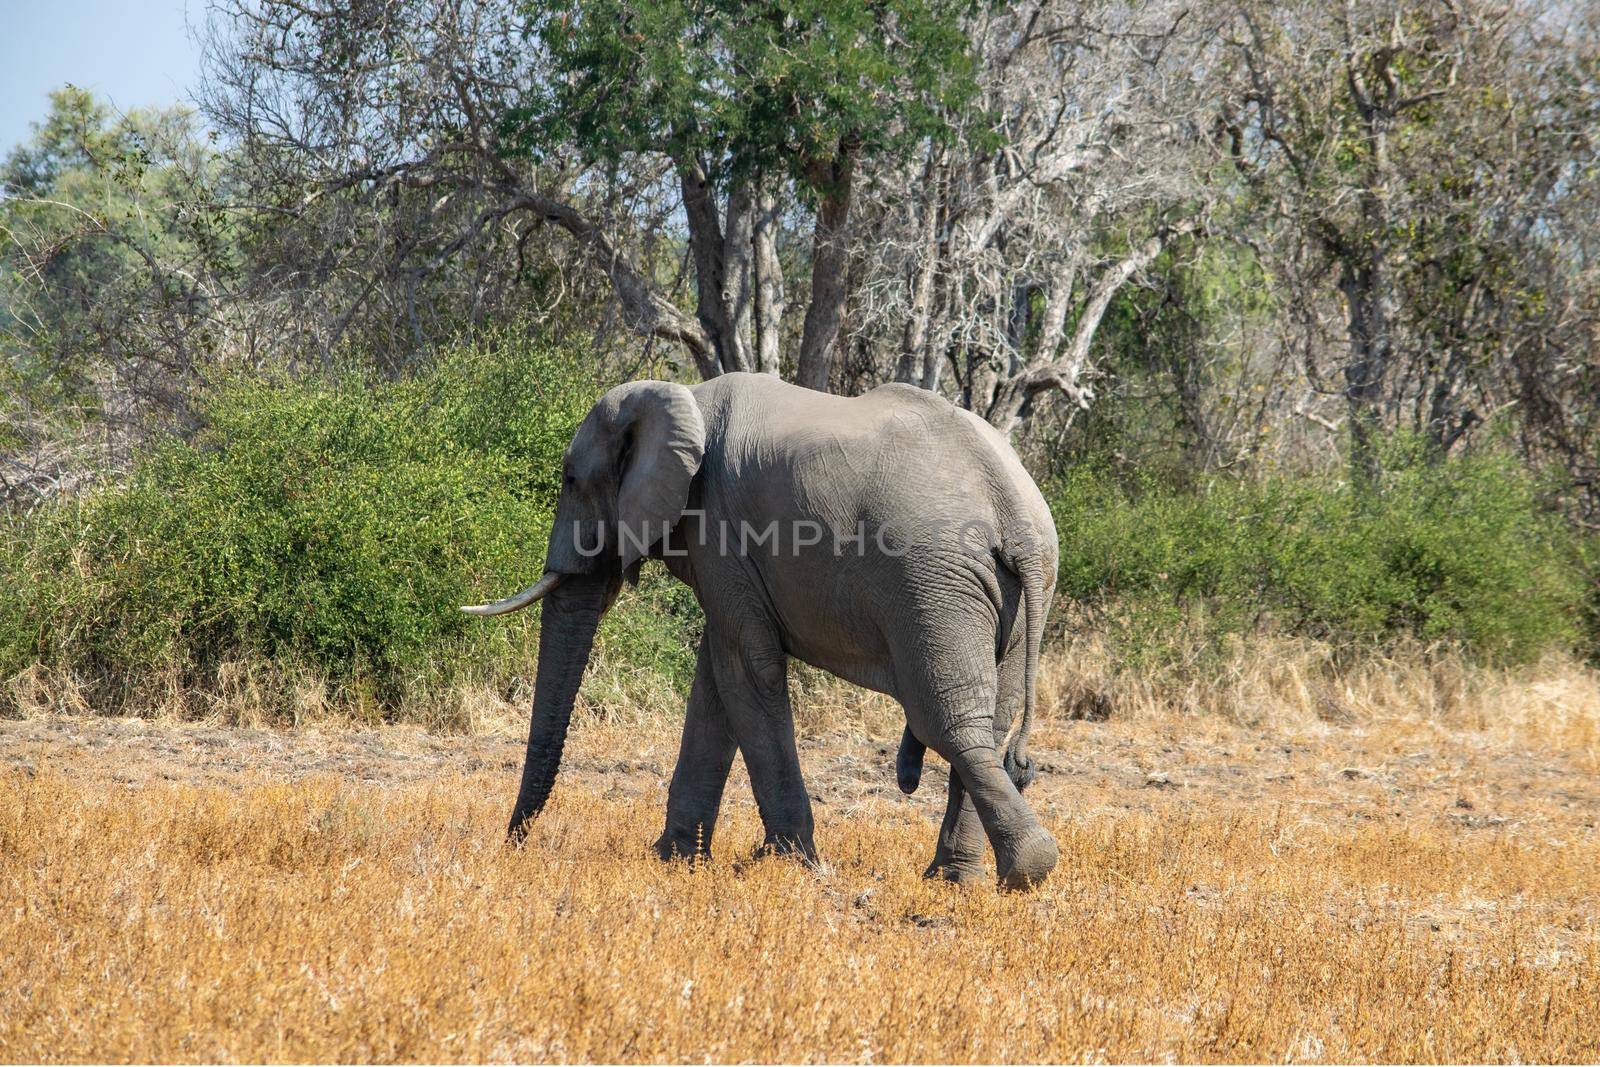 An amazing close up of a huge elephant moving in the bush